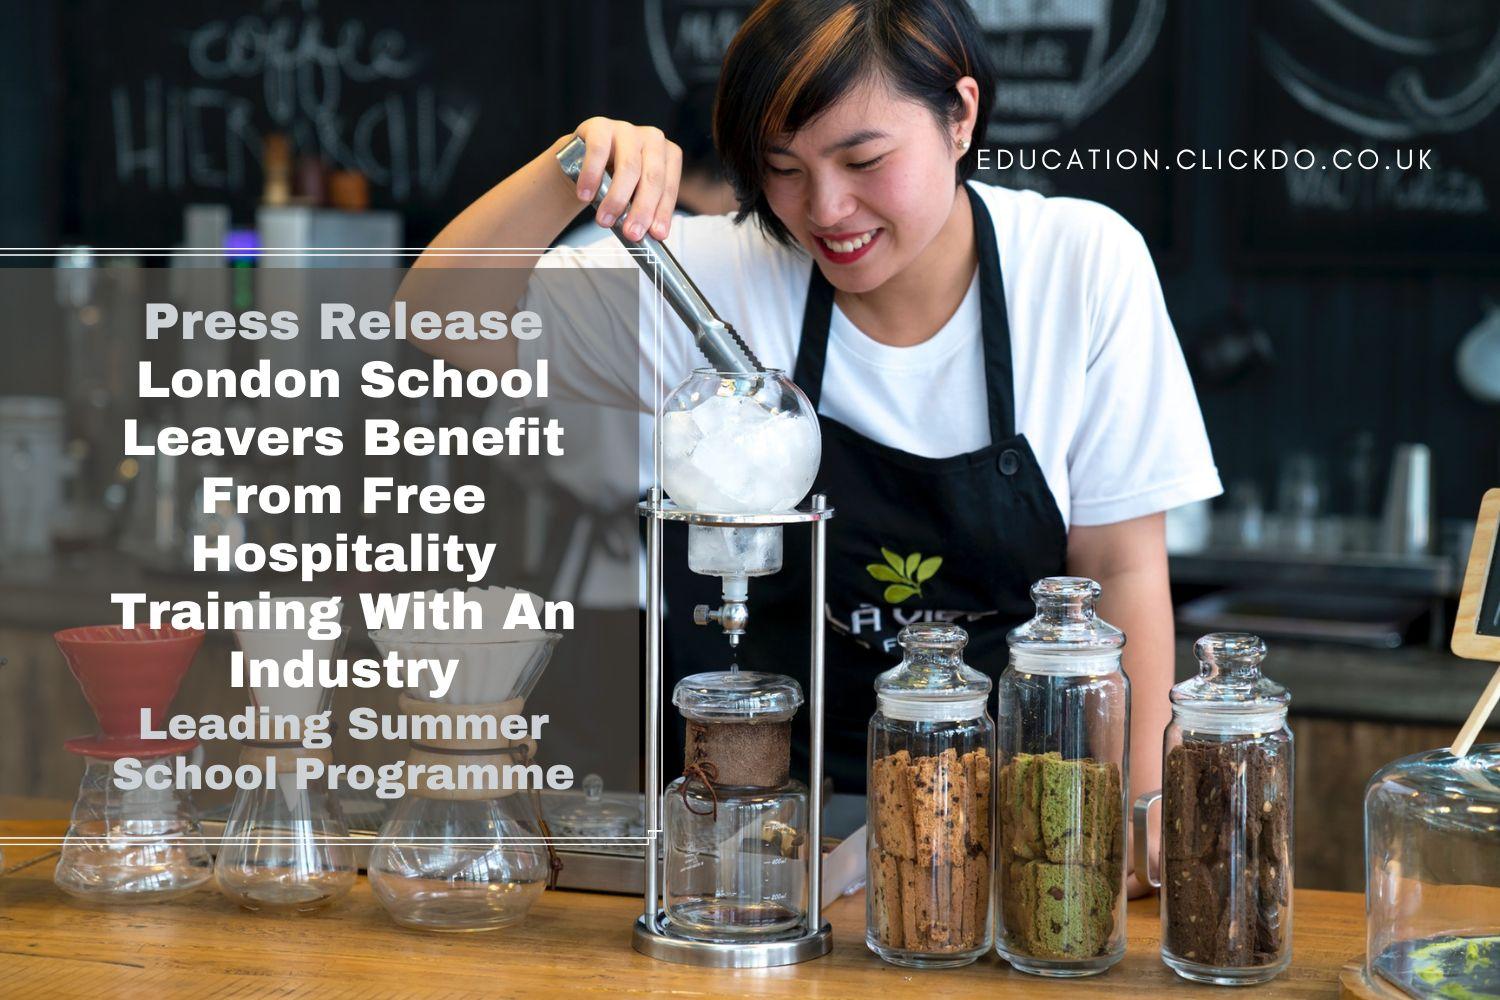 Press-Release-London-School-Leavers-Benefit-From-Free-Hospitality-Training-With-An-Industry-Leading-Summer-School-Programme